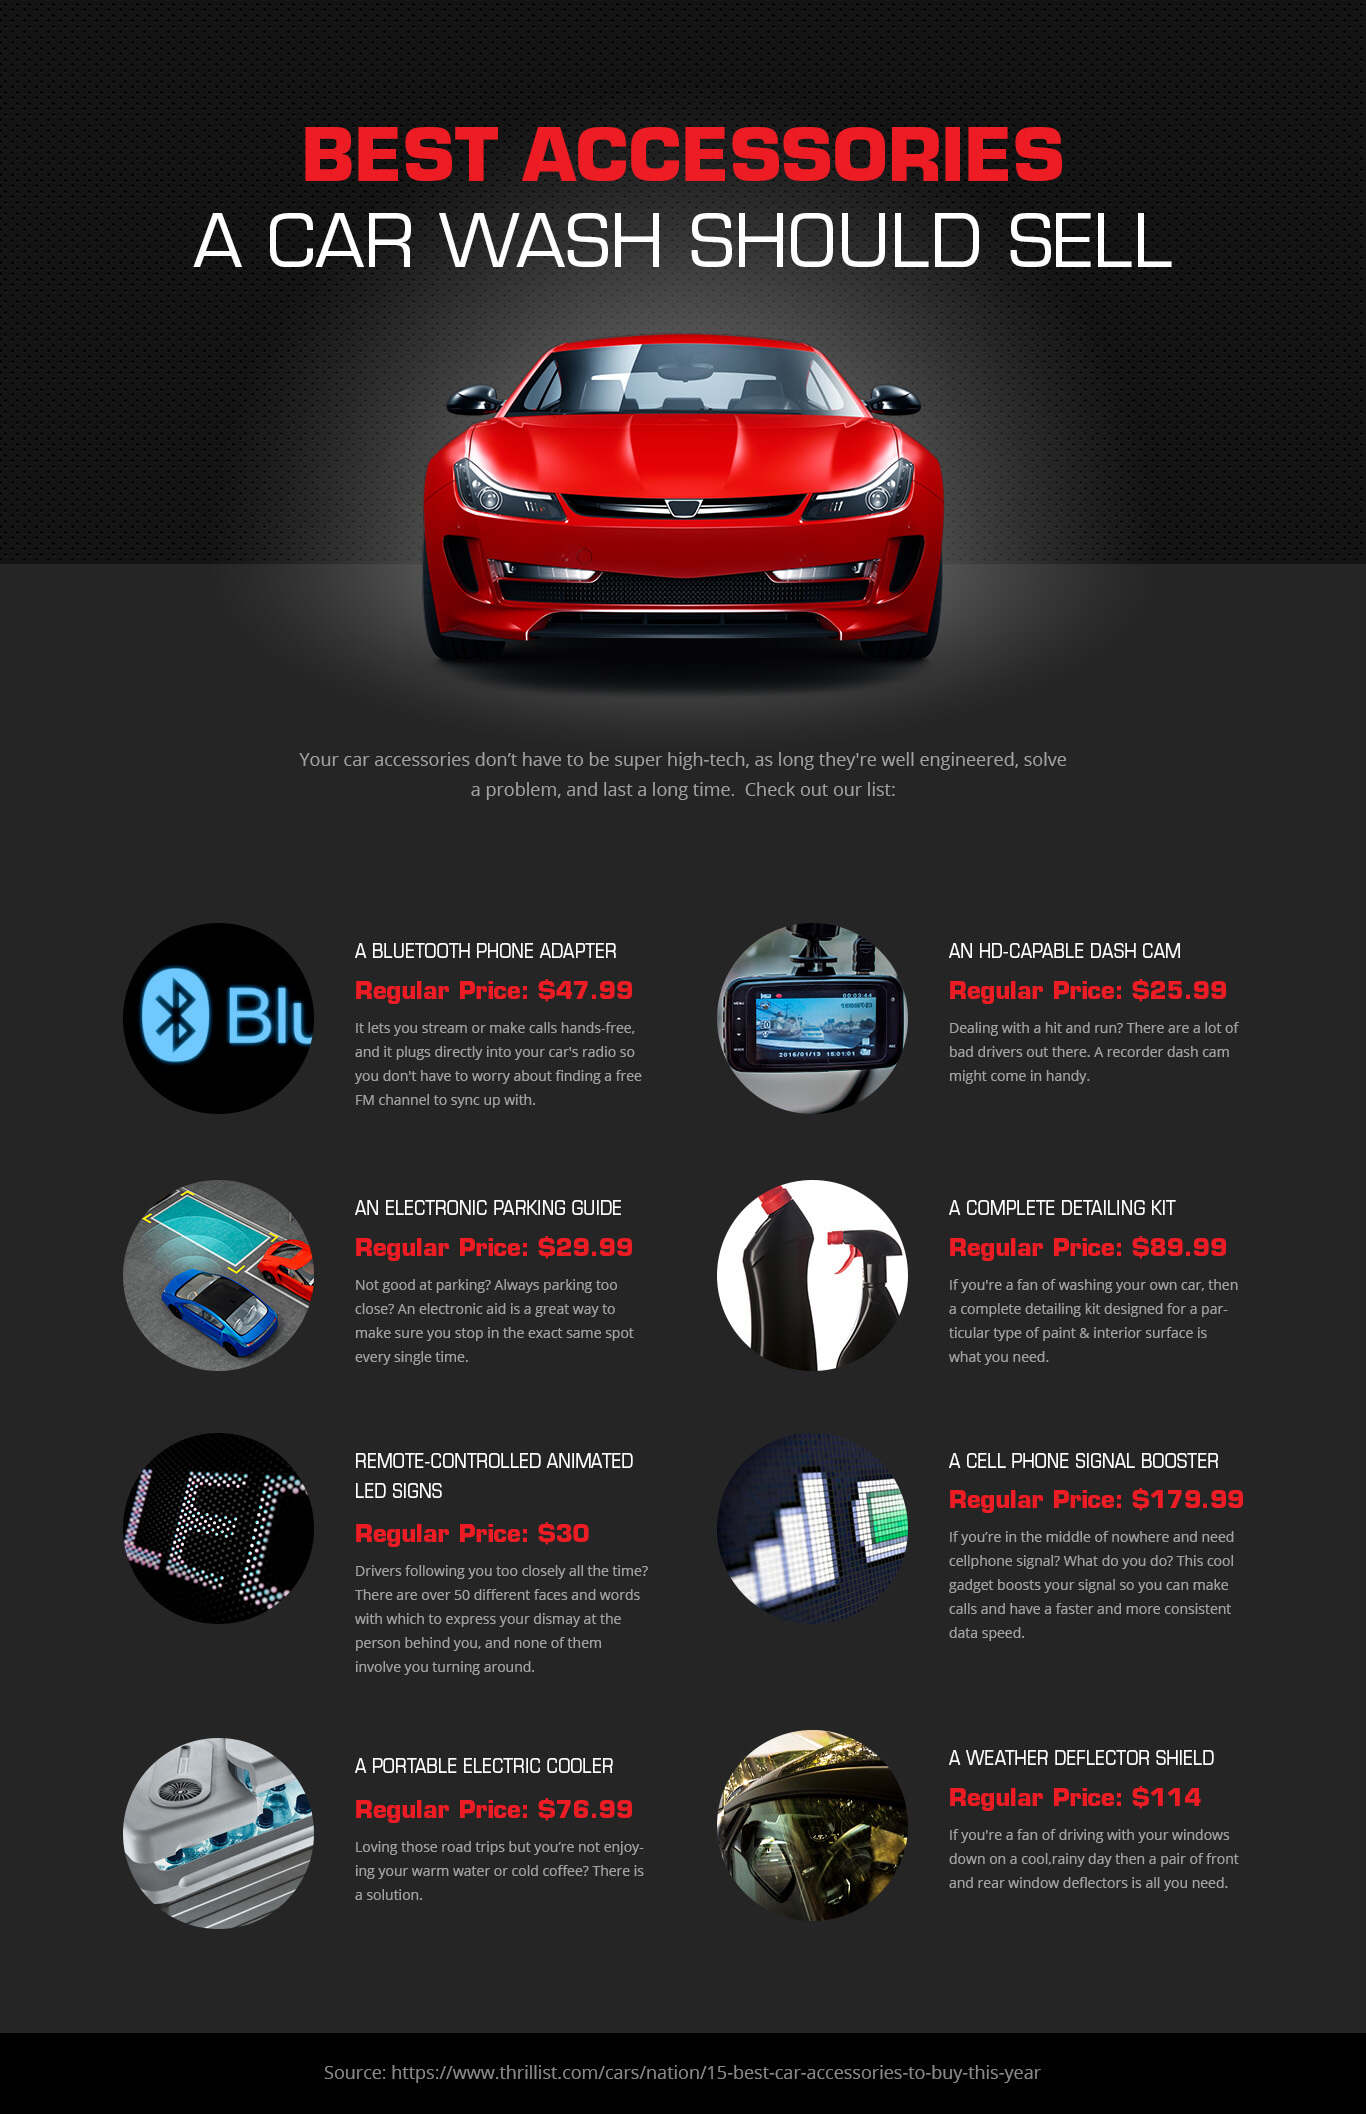 https://marvel-b1-cdn.bc0a.com/f00000000270514/s25180.pcdn.co/wp-content/uploads/2016/11/Best-Accessories-A-Car-Wash-Should-Sell-Infographic.jpeg